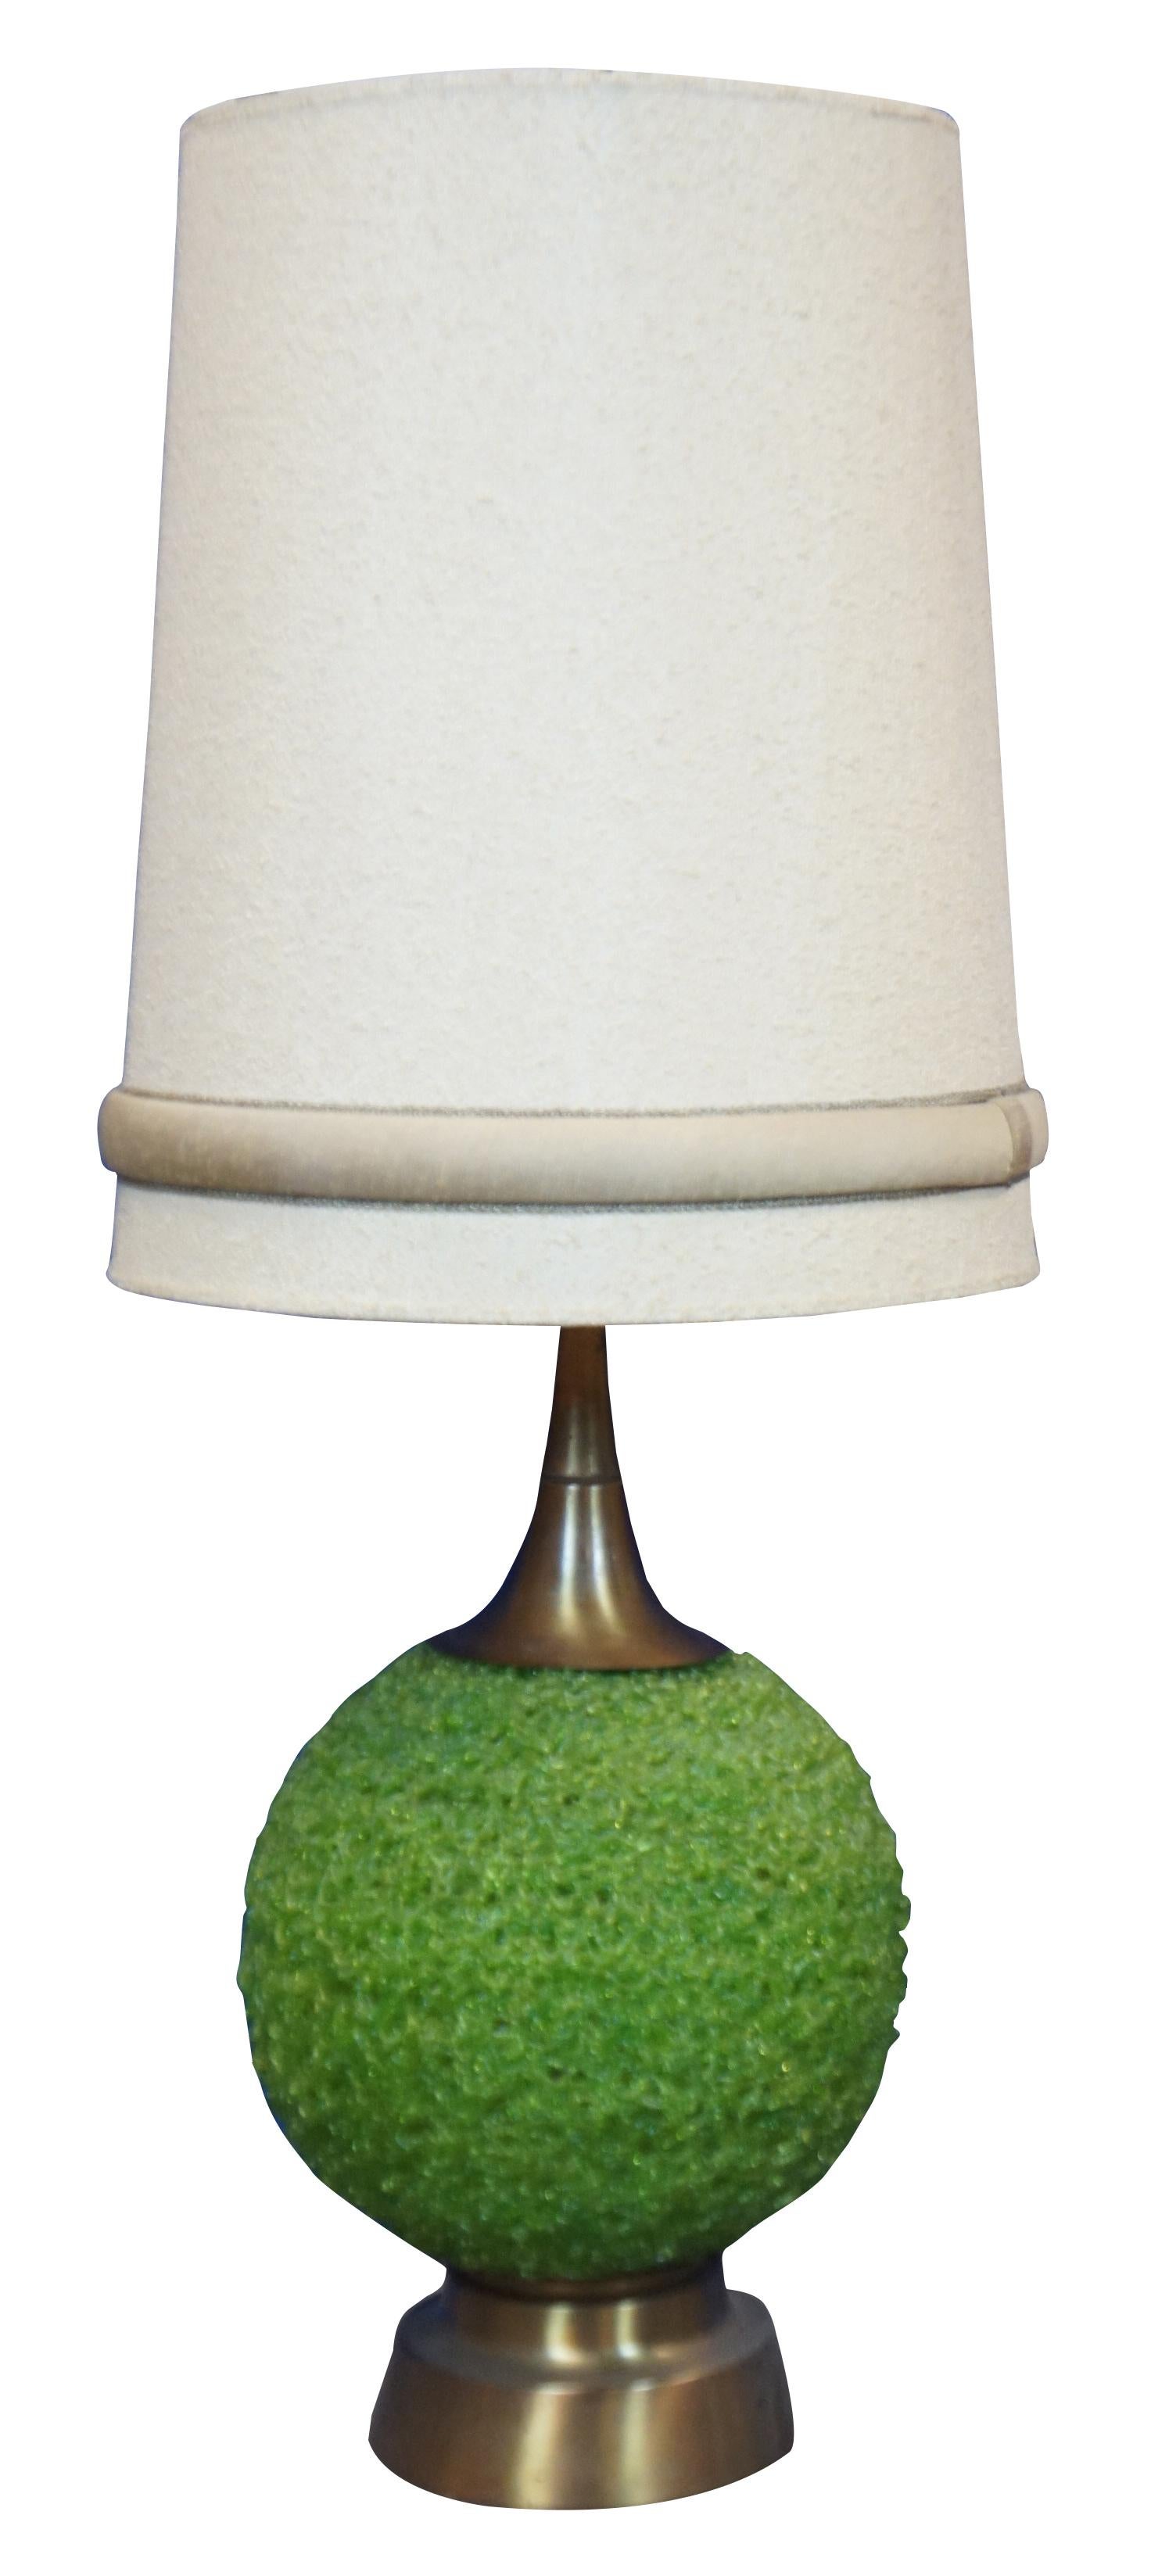 Two large Mid-Century Modern / atomic age table lamp featuring orbs of spun green lucite on brass bases. Includes trimmed linen shades.

Measures: 13” x 28” / Shade - 18.5” x 22” (Diameter x Height).